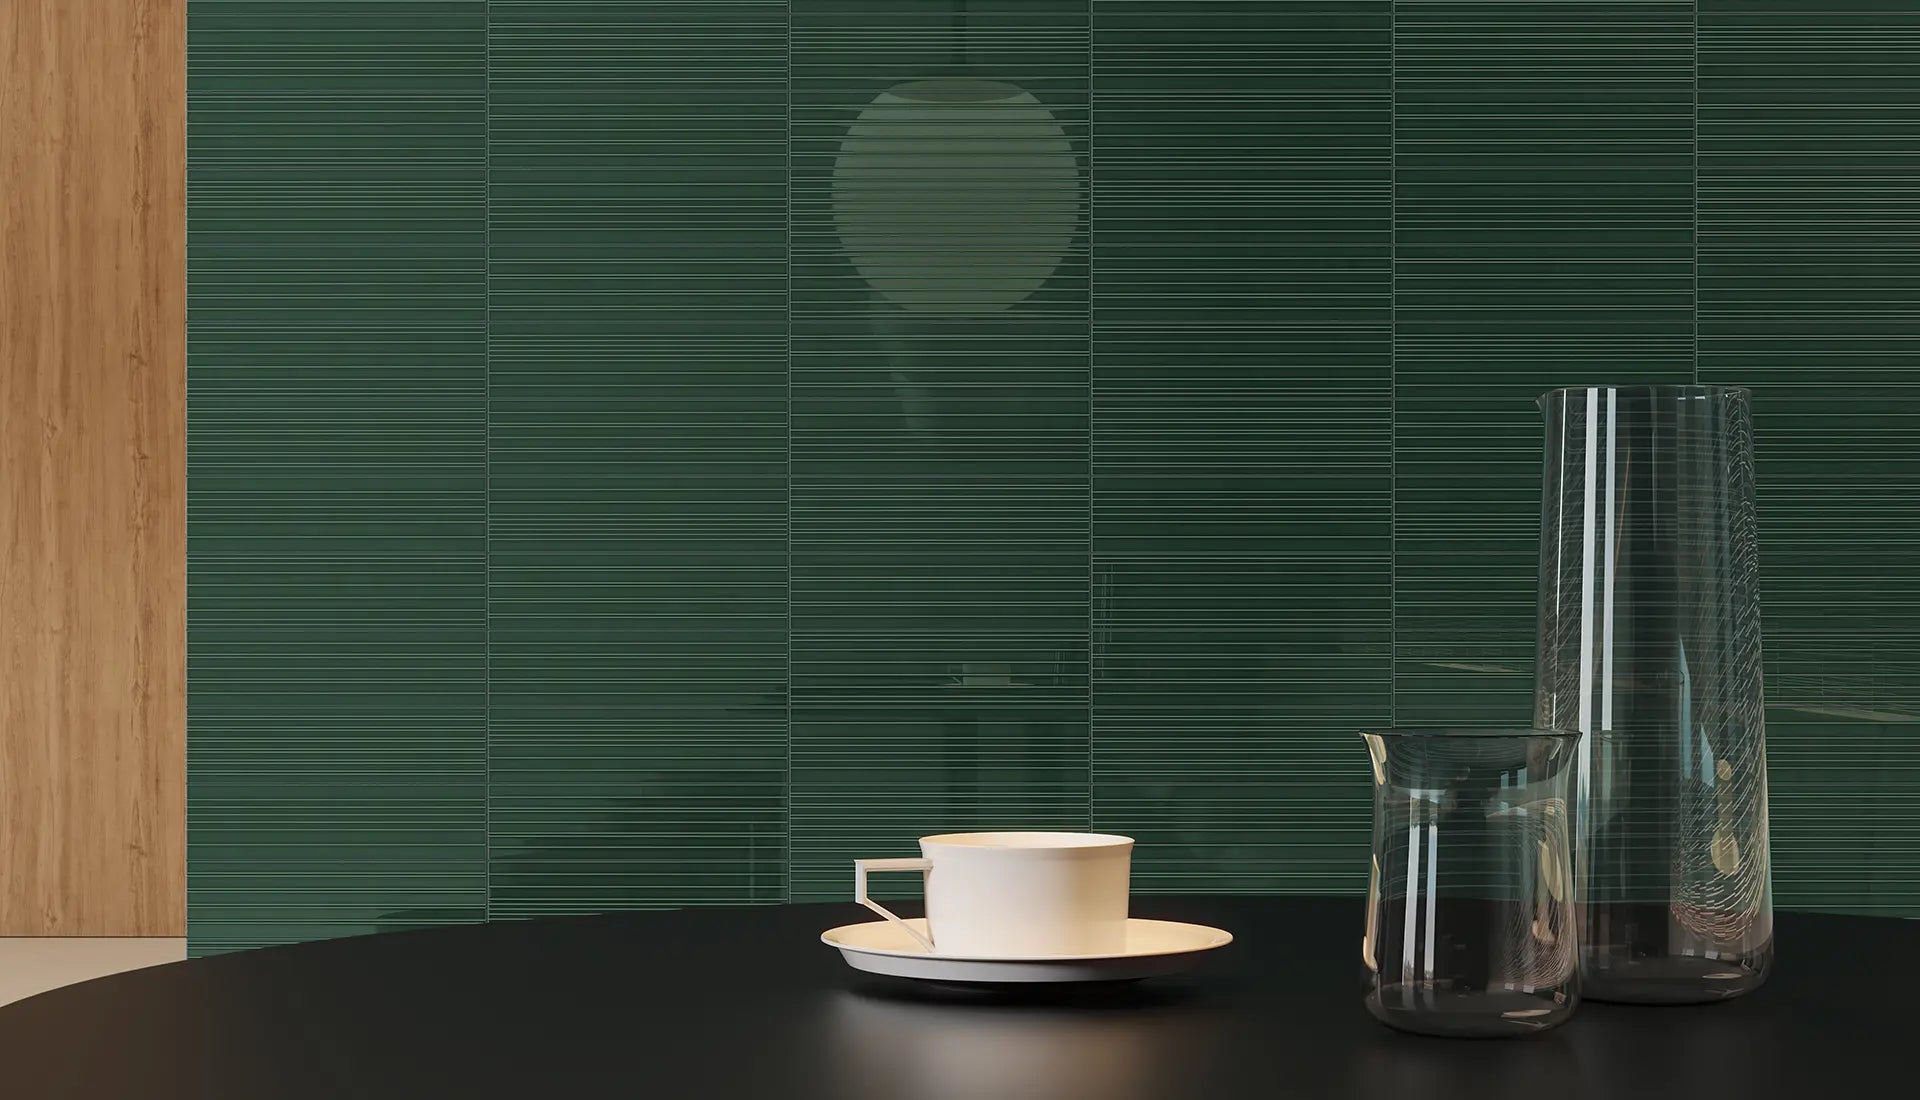 Elegant kitchen wall featuring vertically stacked green ceramic tiles with a subtle linear texture, complemented by minimalist tableware and sleek glass vases, creating a modern and sophisticated ambiance.